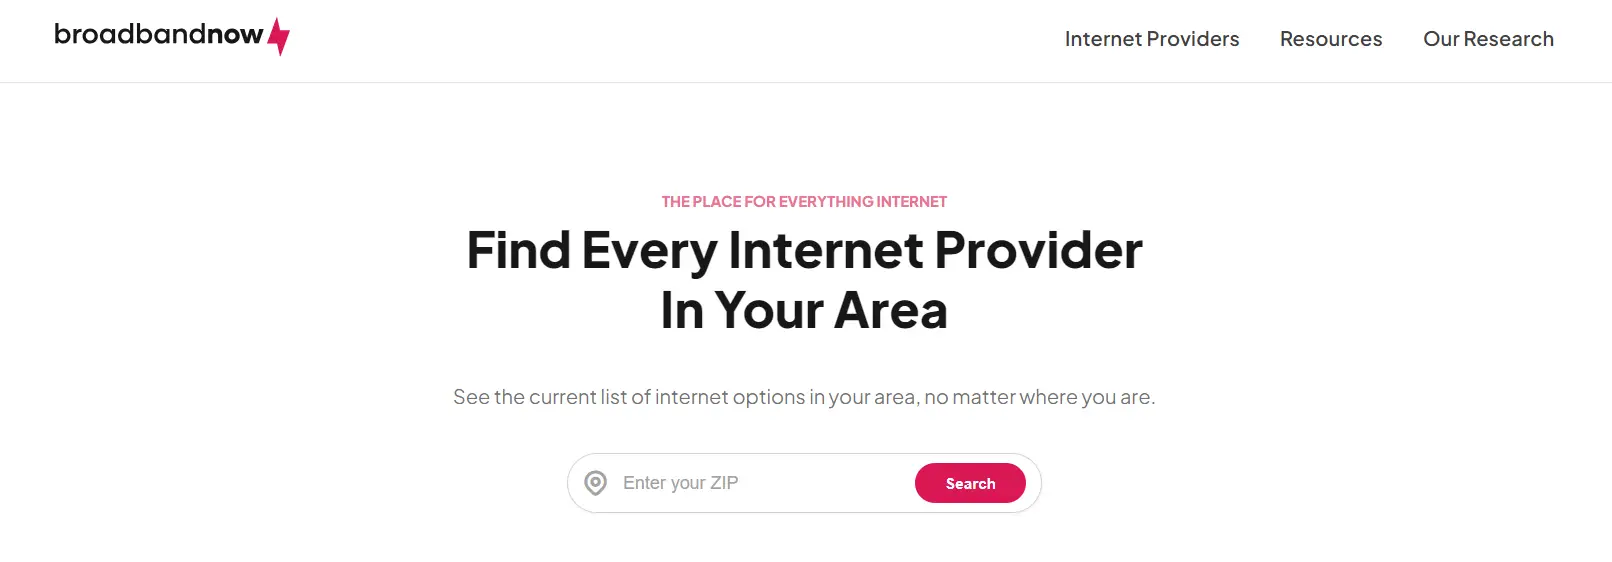 Finding Your WiFi Match: Top Home Internet Options by Area - Panama Hitek